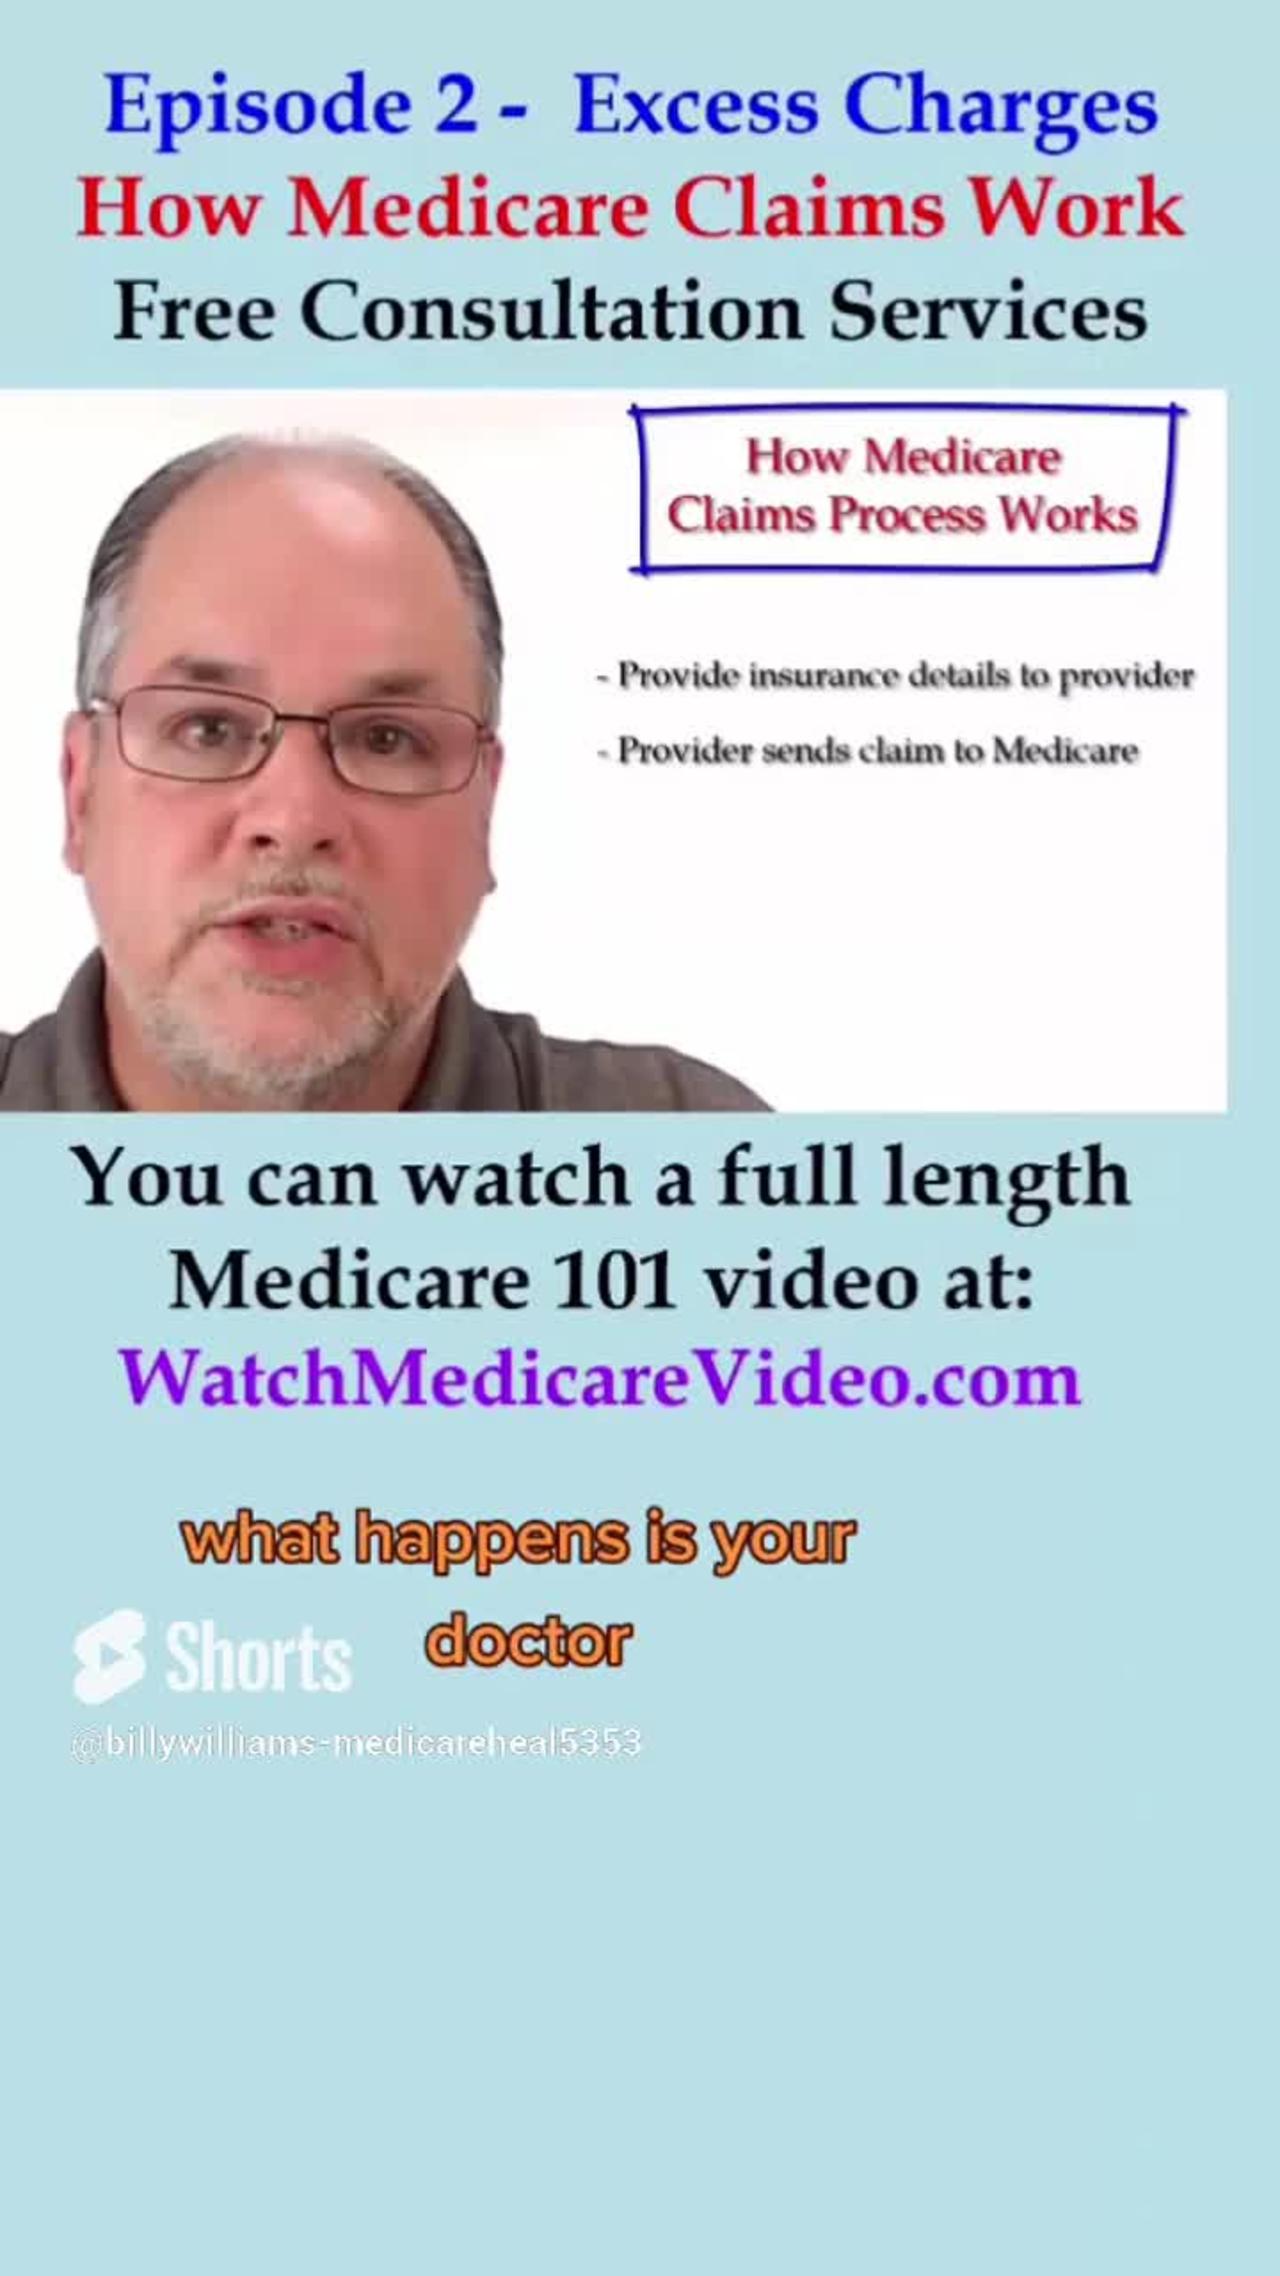 Episode 2 - How the Medicare claims process works in regards to Part B excess charges.